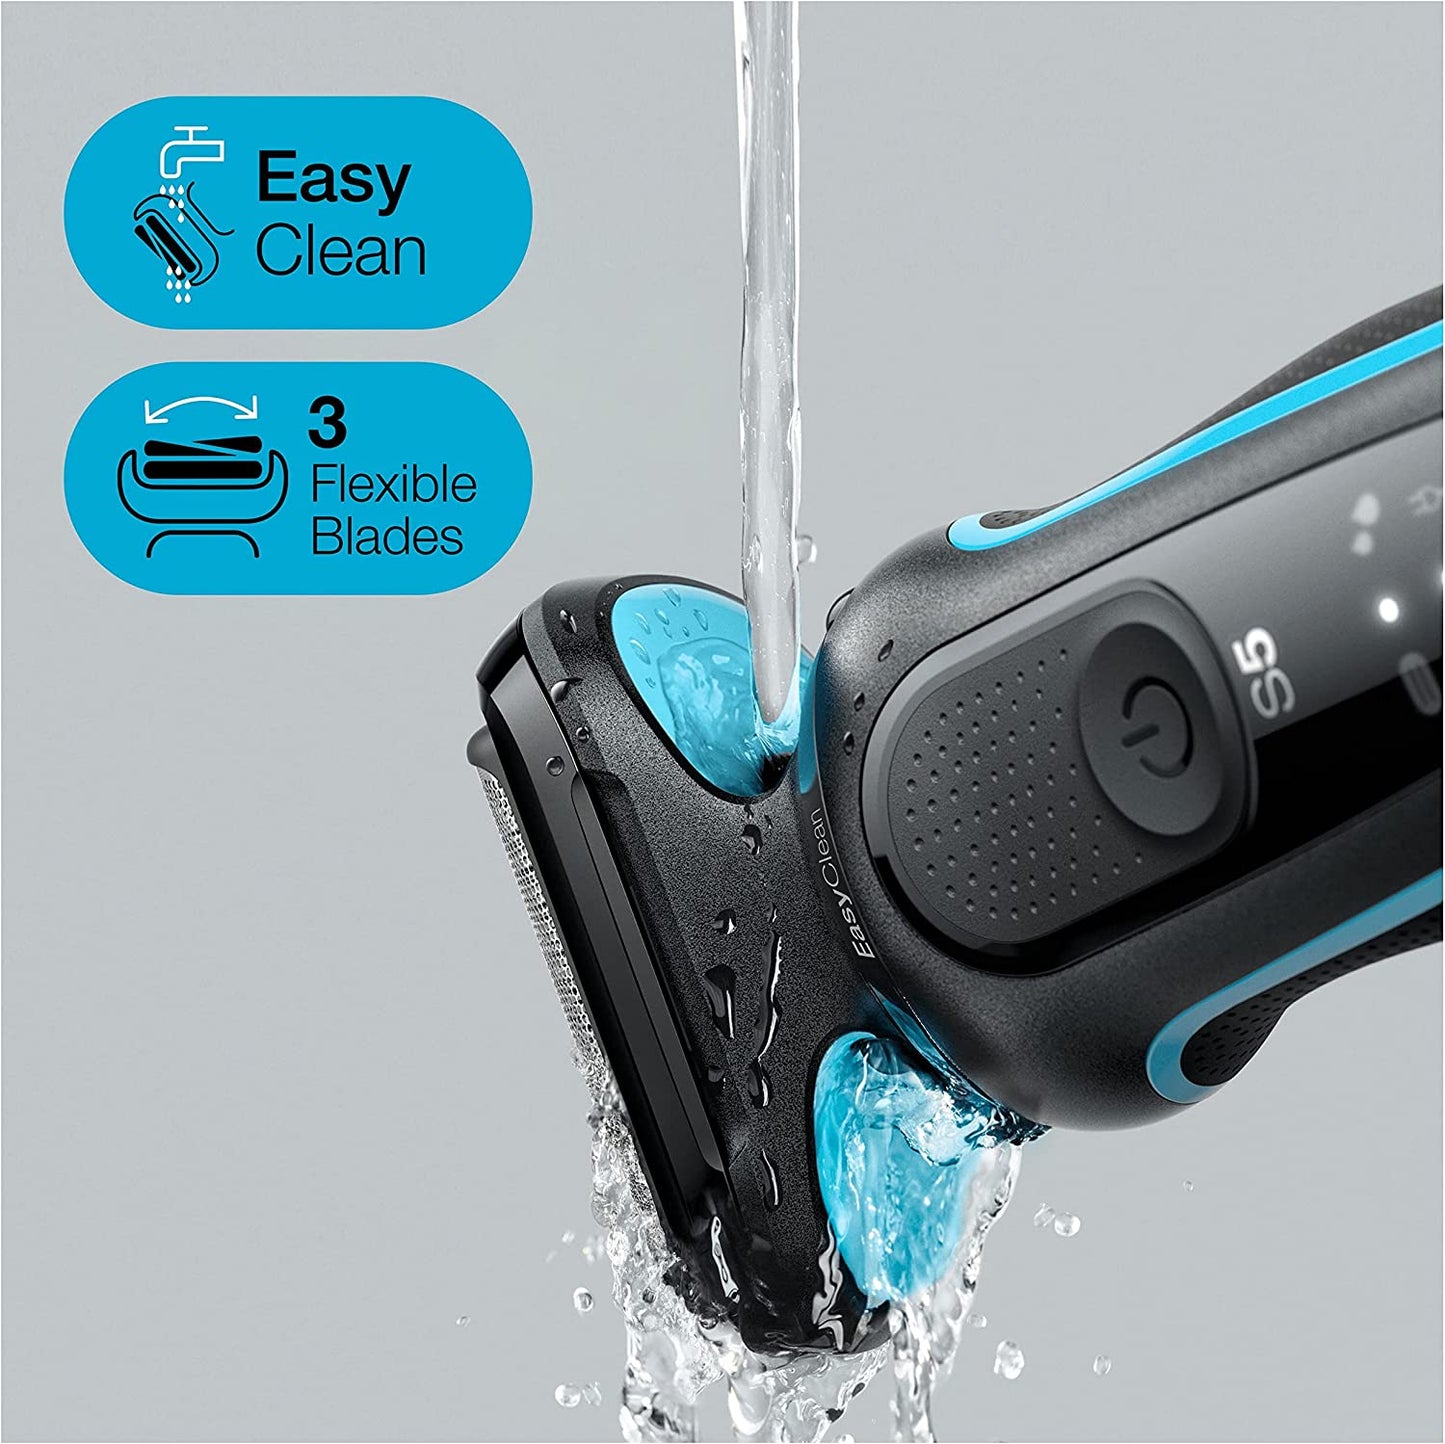 Series 5 Electric Shaver, with Beard Trimmer, Charging Stand, Wet & Dry, 100% Waterproof, Easy Clean System, 2 Pin Bathroom Plug, 50-M4500Cs, Mint Razor, Rated Which Best Buy